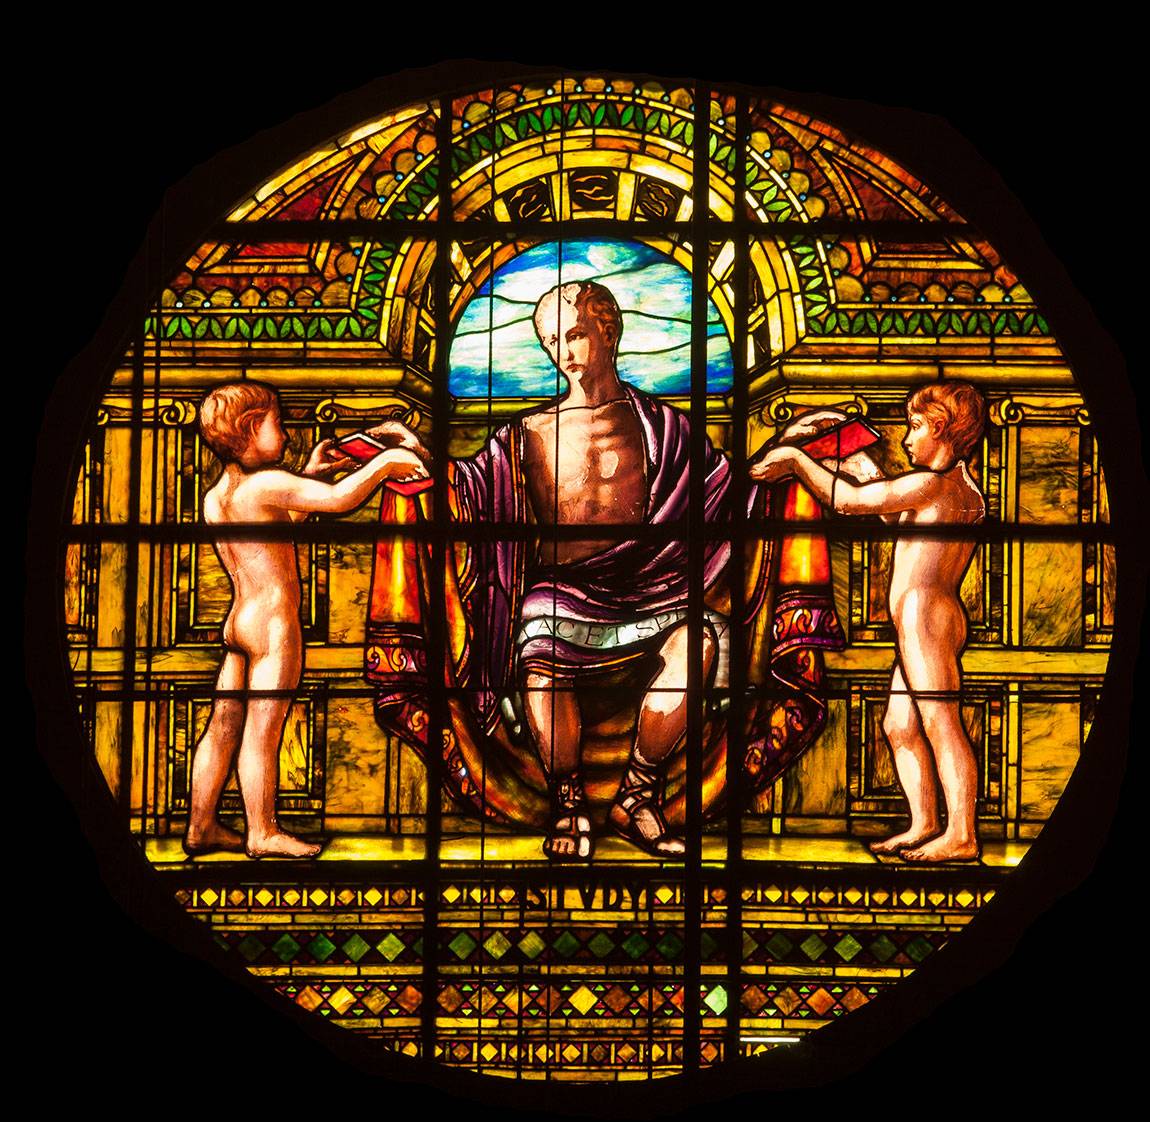 Richardson Auditorium in Alexander Hall stained glass panel